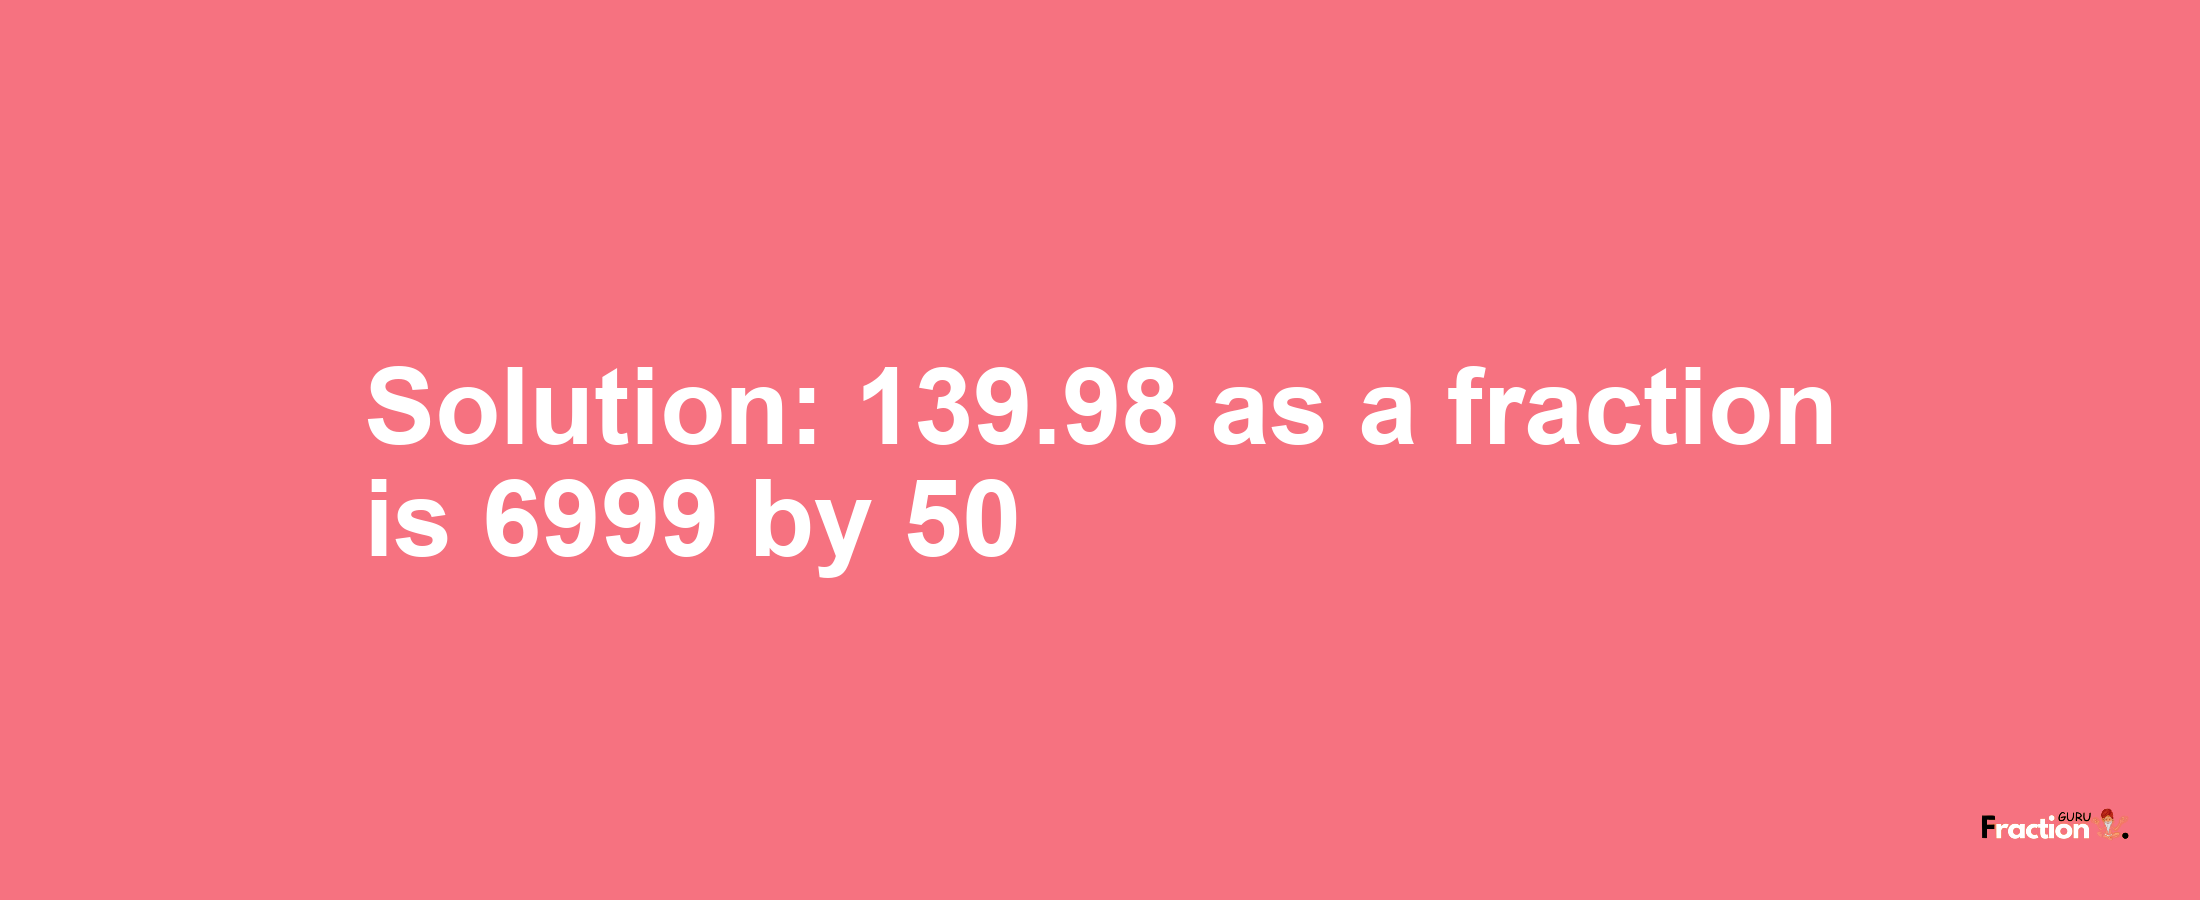 Solution:139.98 as a fraction is 6999/50